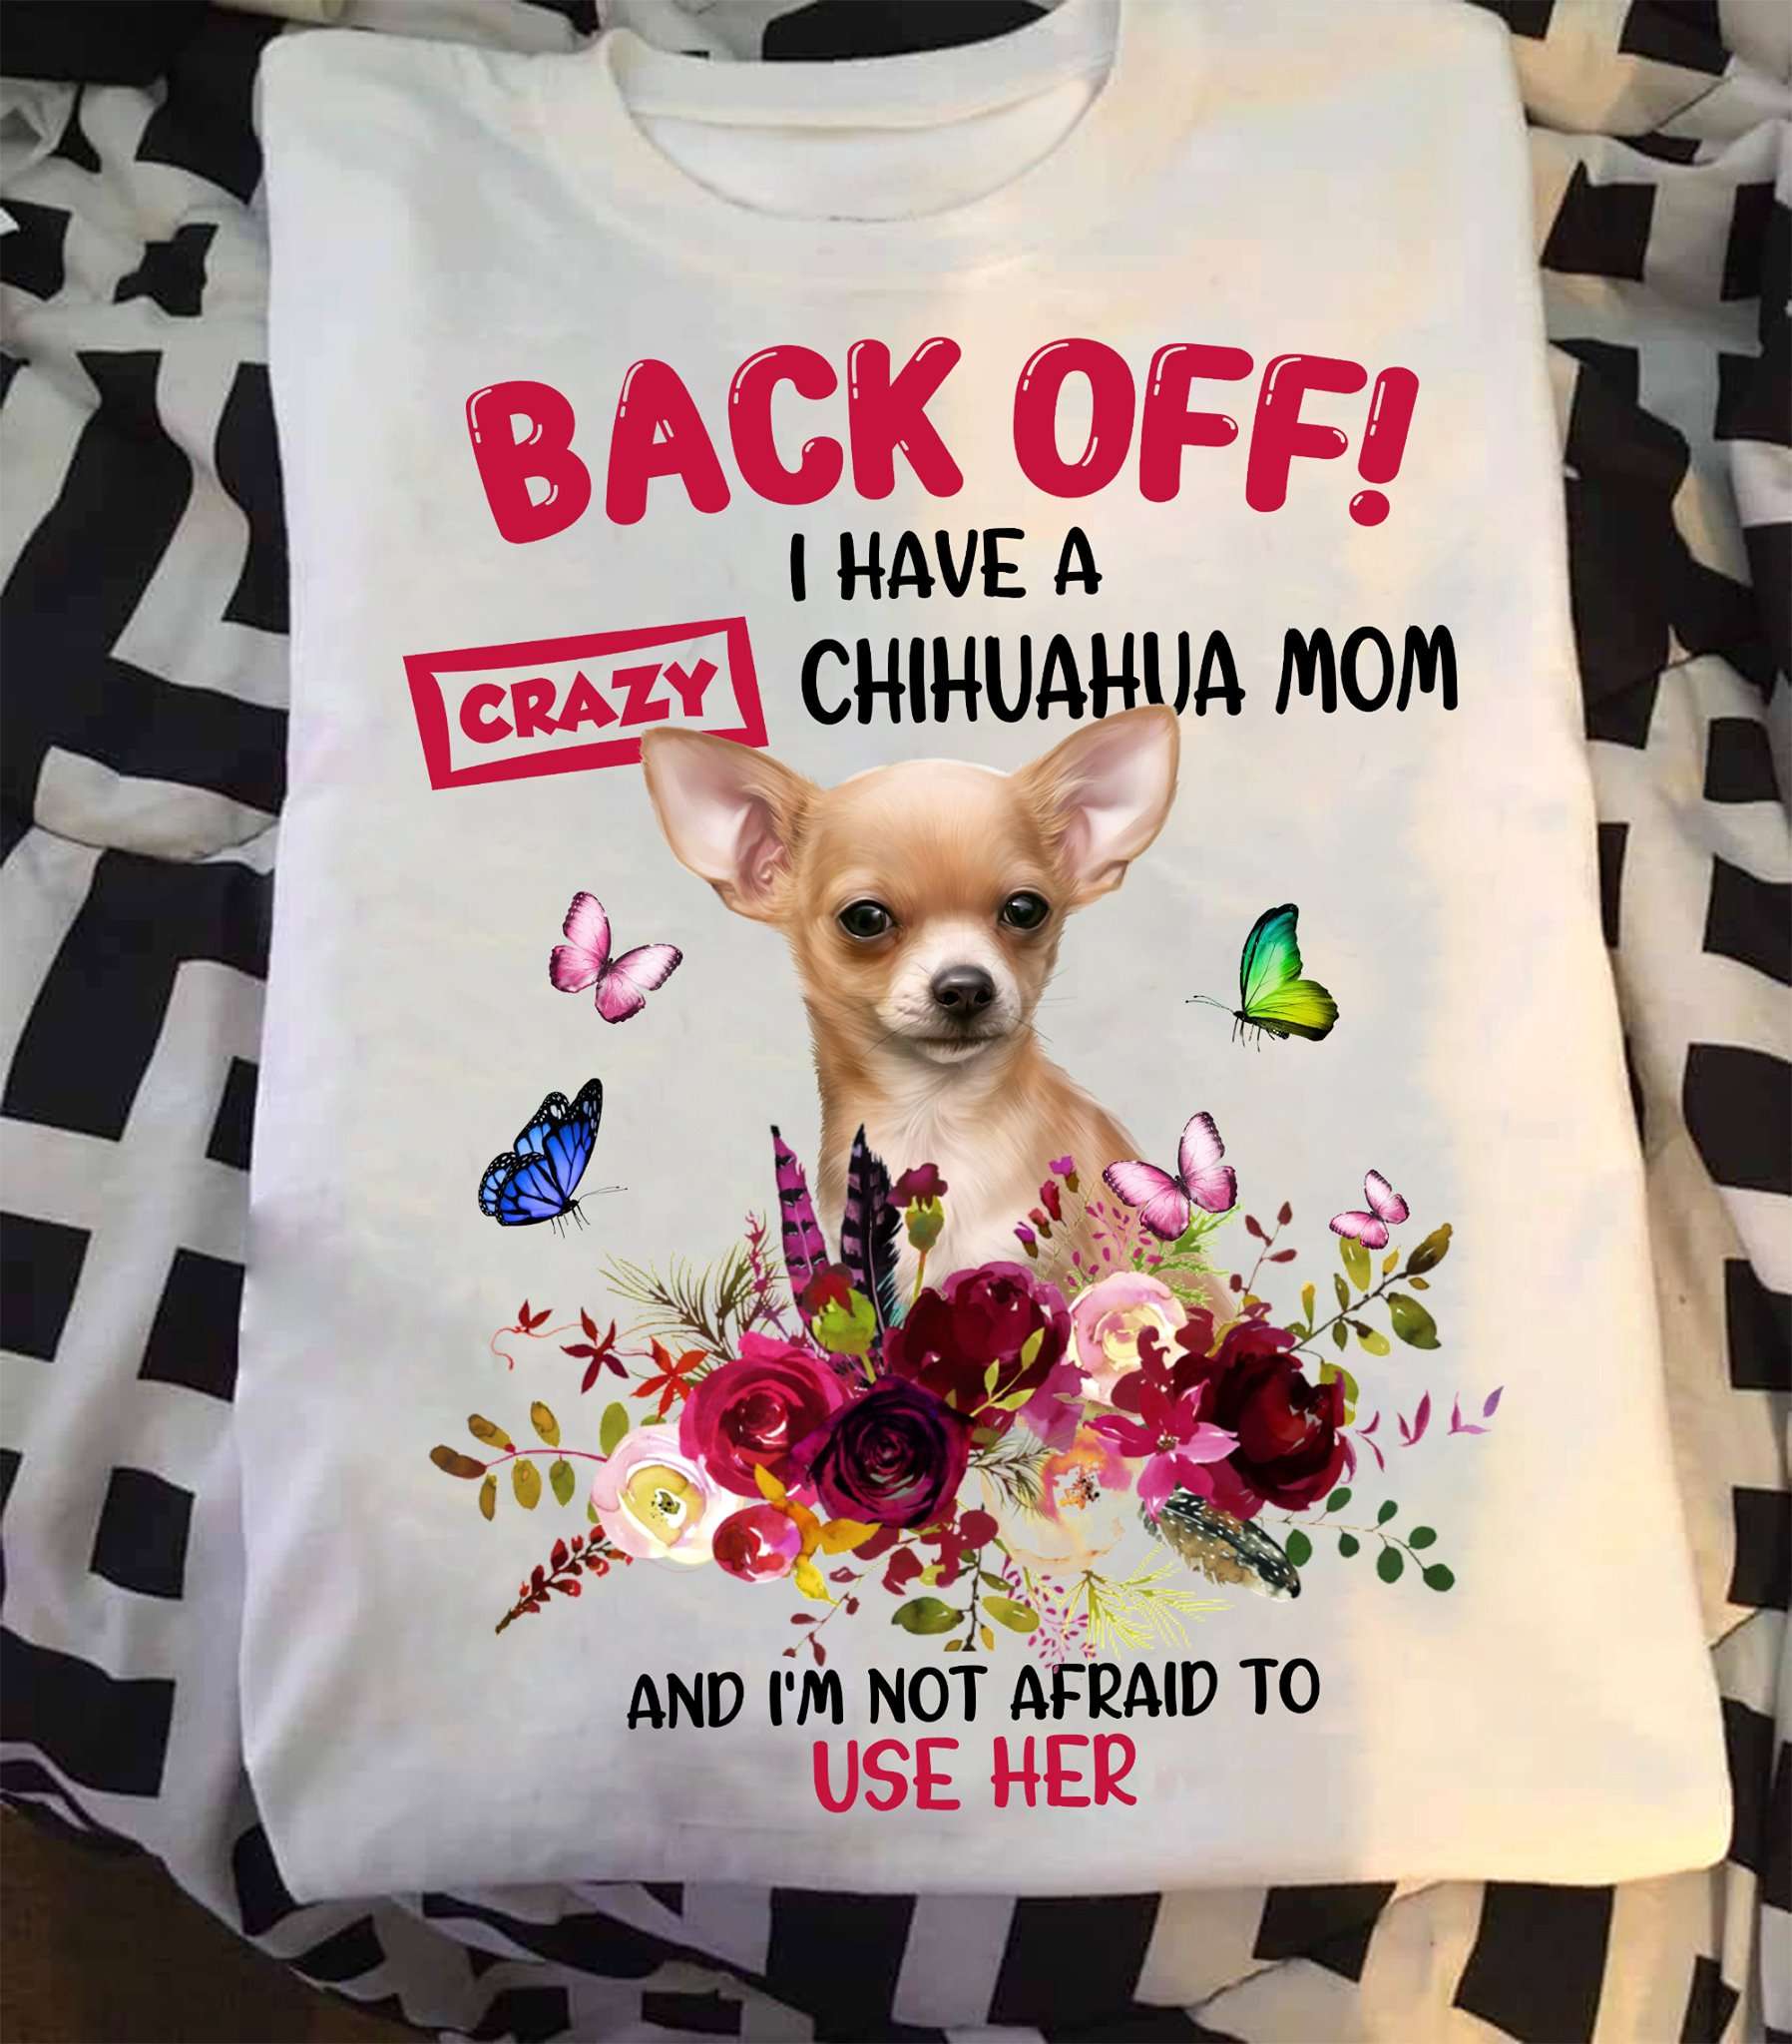 Chihuahua Butterfly Flower - Back off i have a crazy chihuahua mom and i'm not afraid to use her